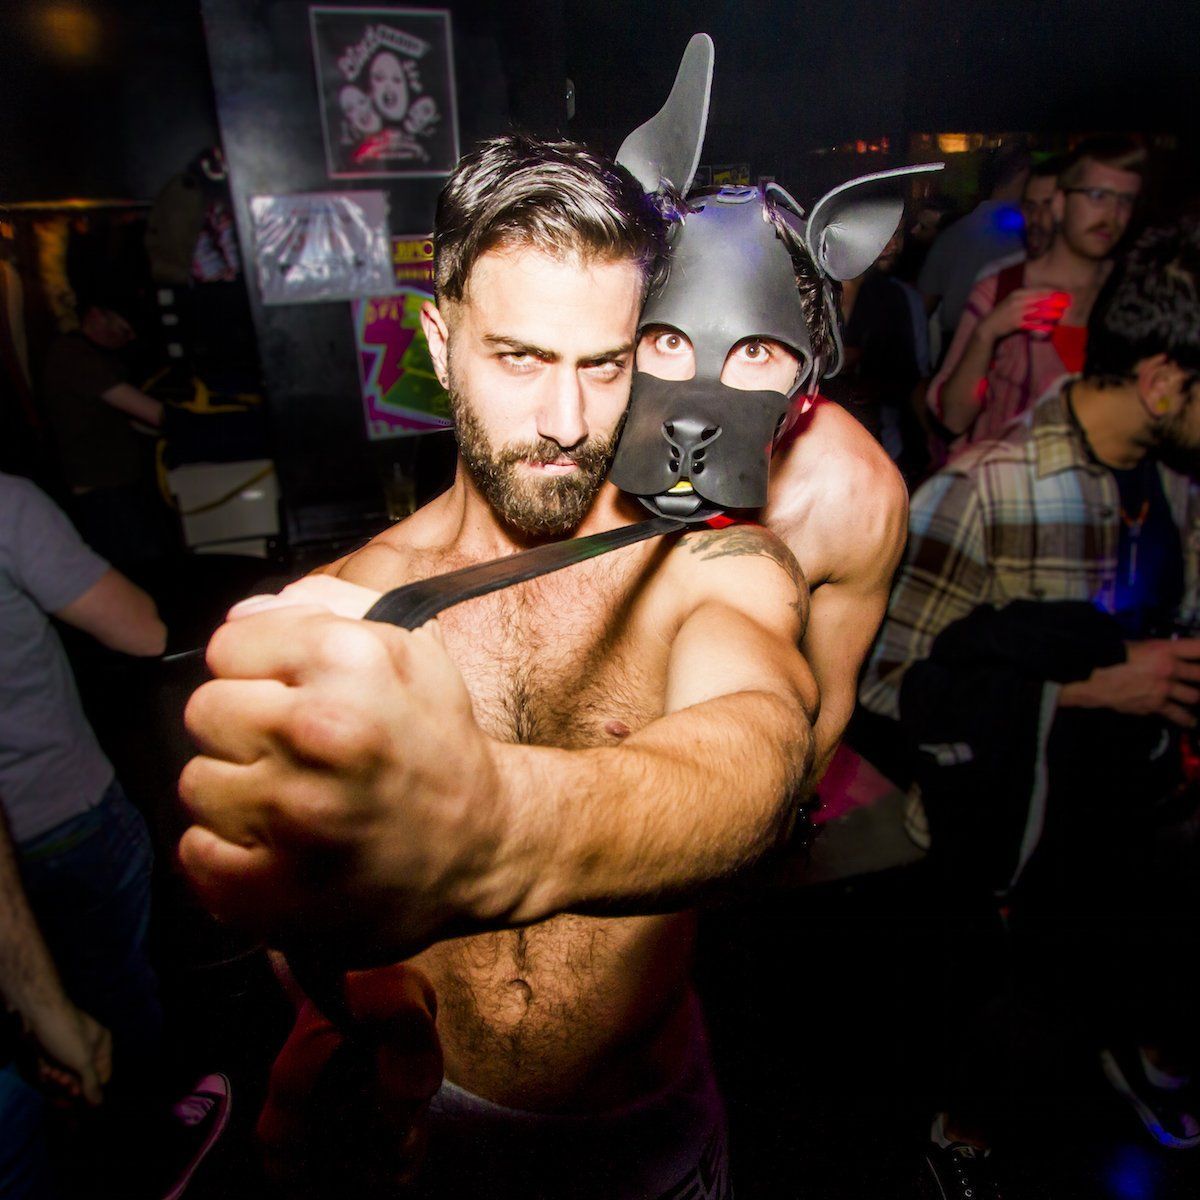 Shut O. recommendet Atlanta and gay leather